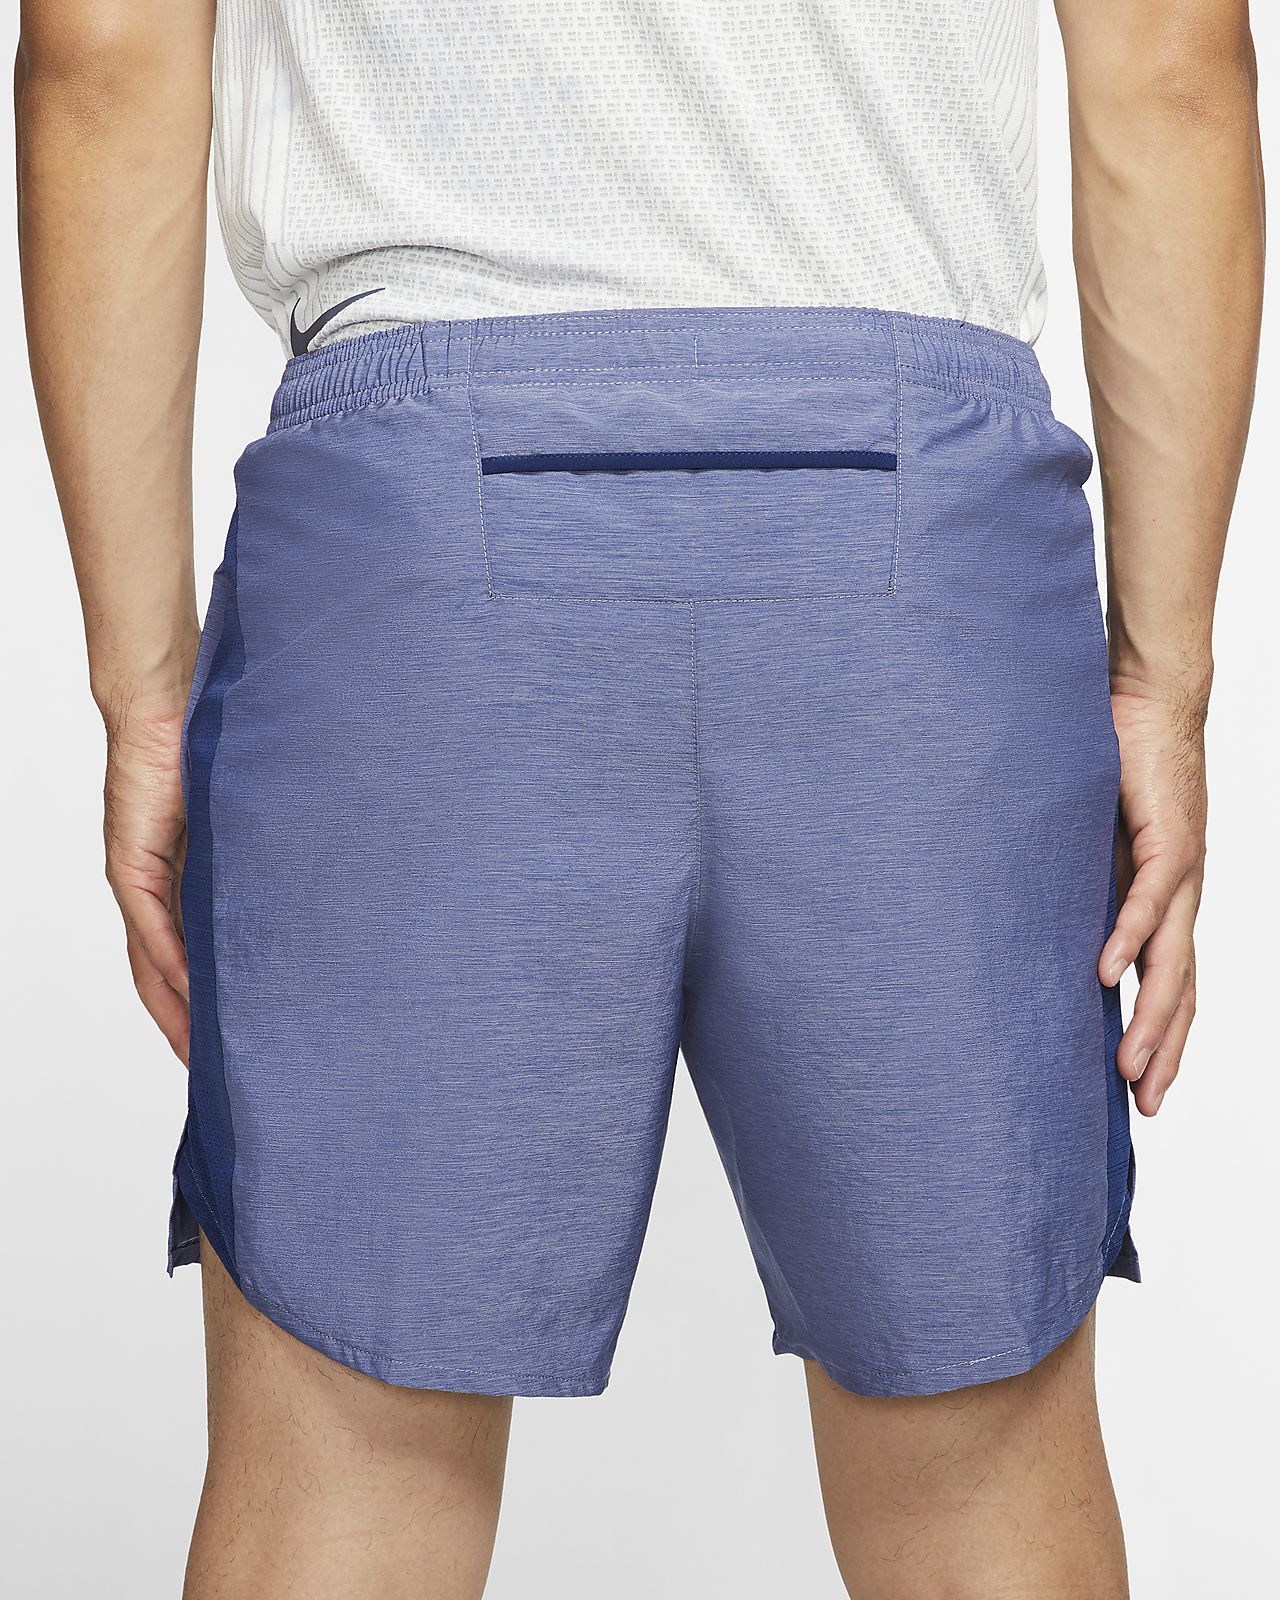 Buy > nike shorts with zipper back pocket > in stock